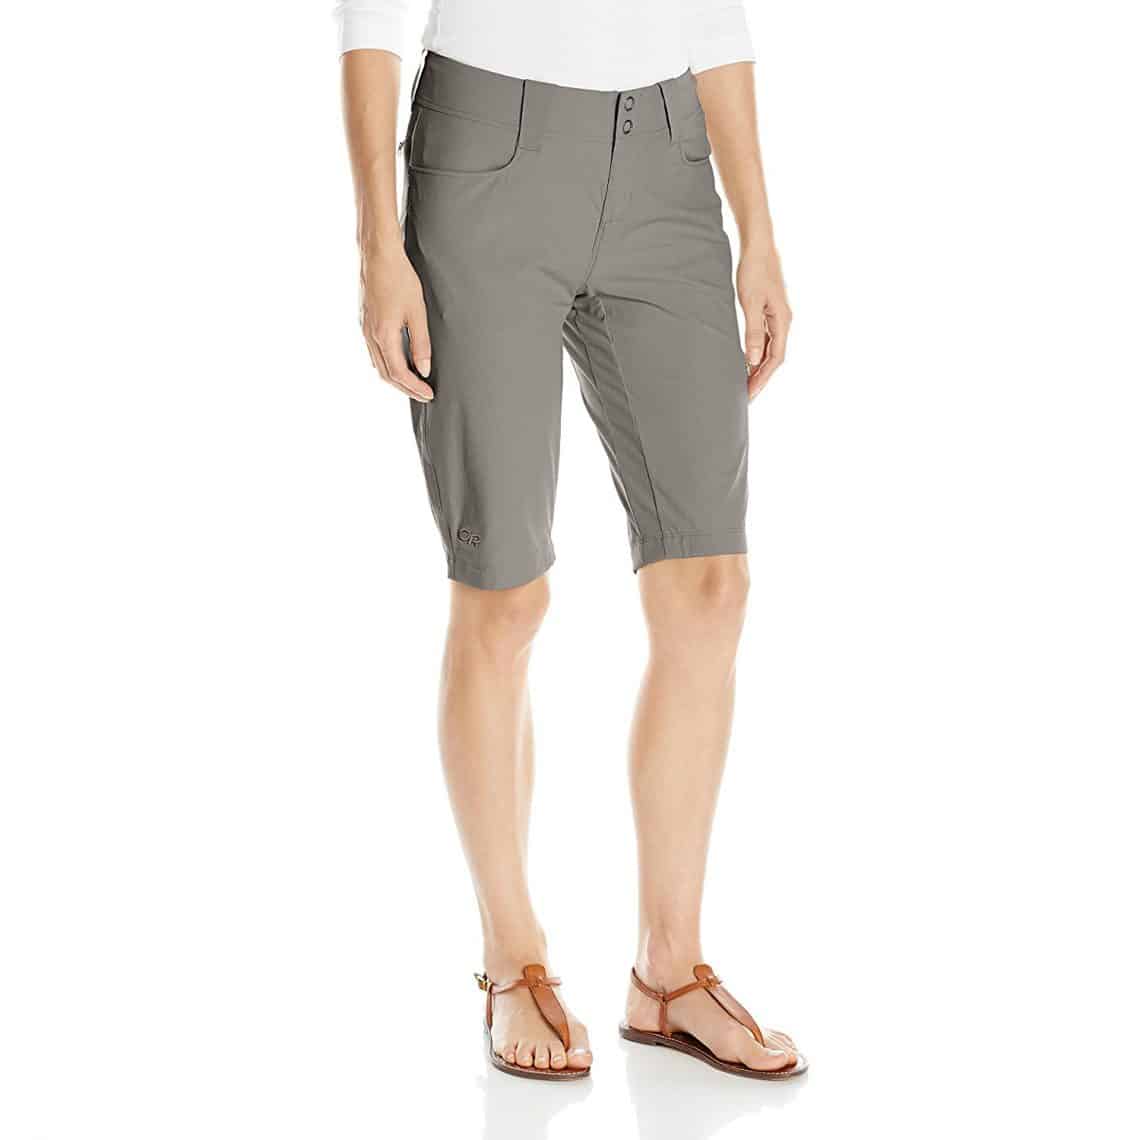 Best Women's Hiking Shorts: Top Picks and Buying Guide